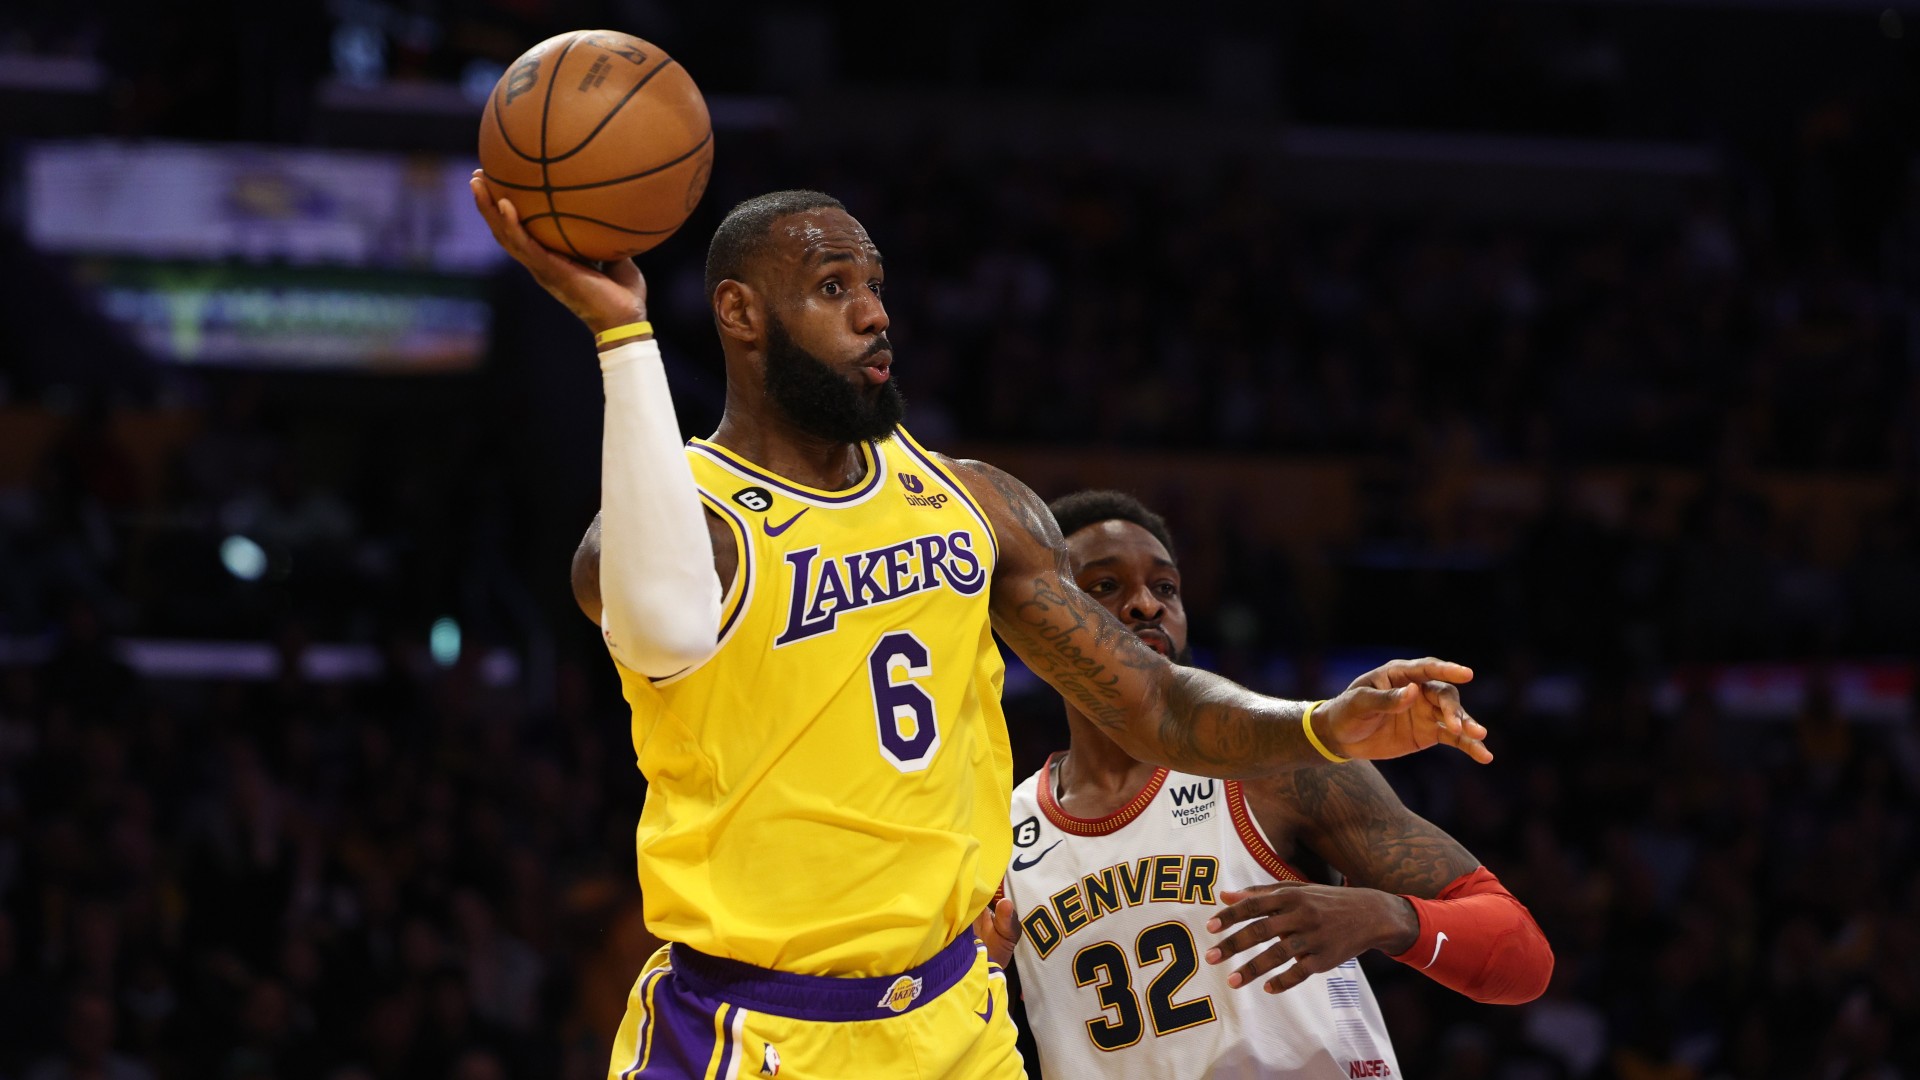 NBA Conference Finals begin with Lakers and Nuggets squaring off